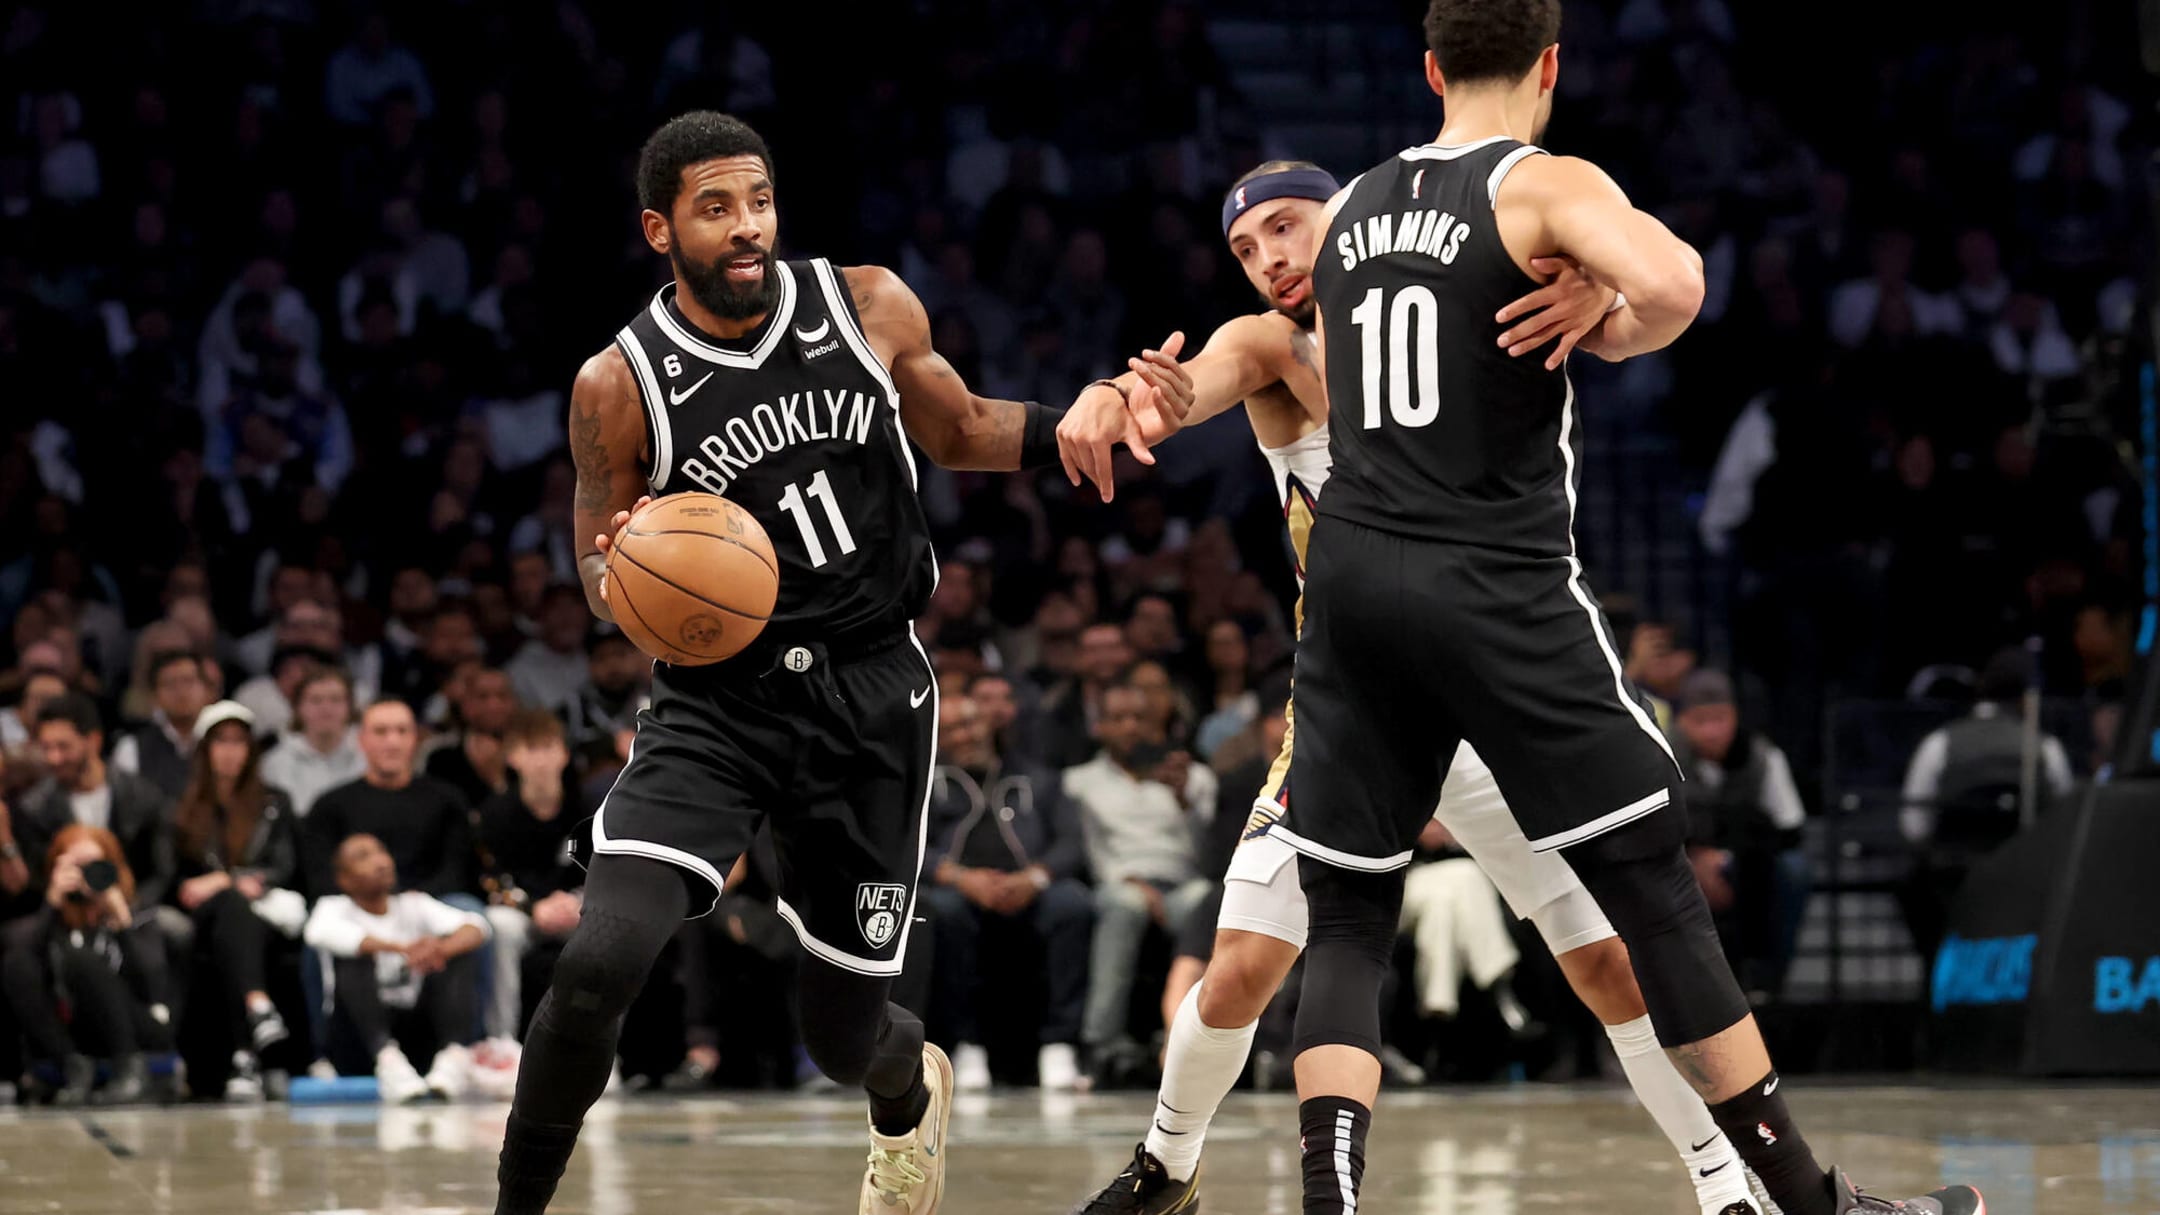 NBA: Brooklyn Nets dysfunction weighs on business prospects